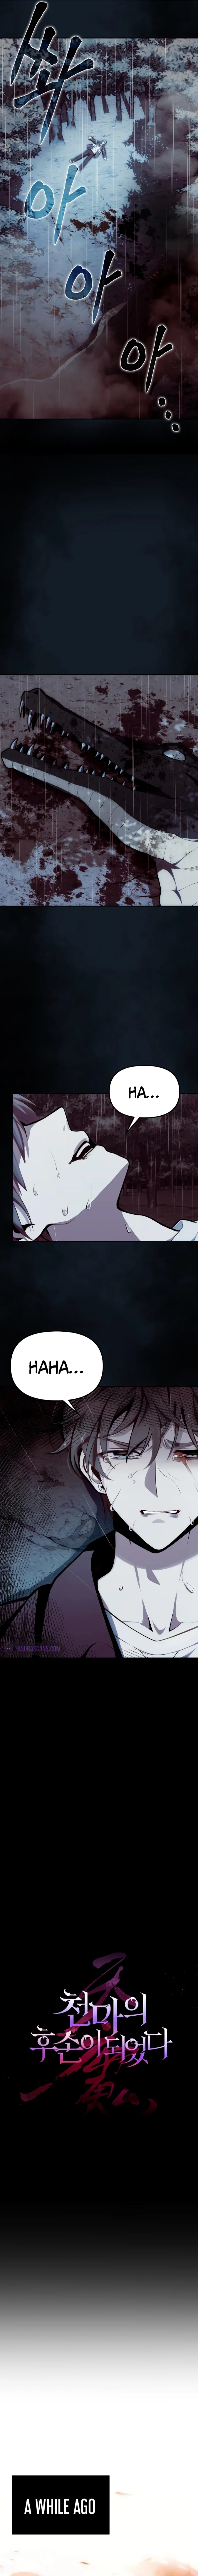 The Heavenly Demon’s Descendant - Chapter 1 Page 7